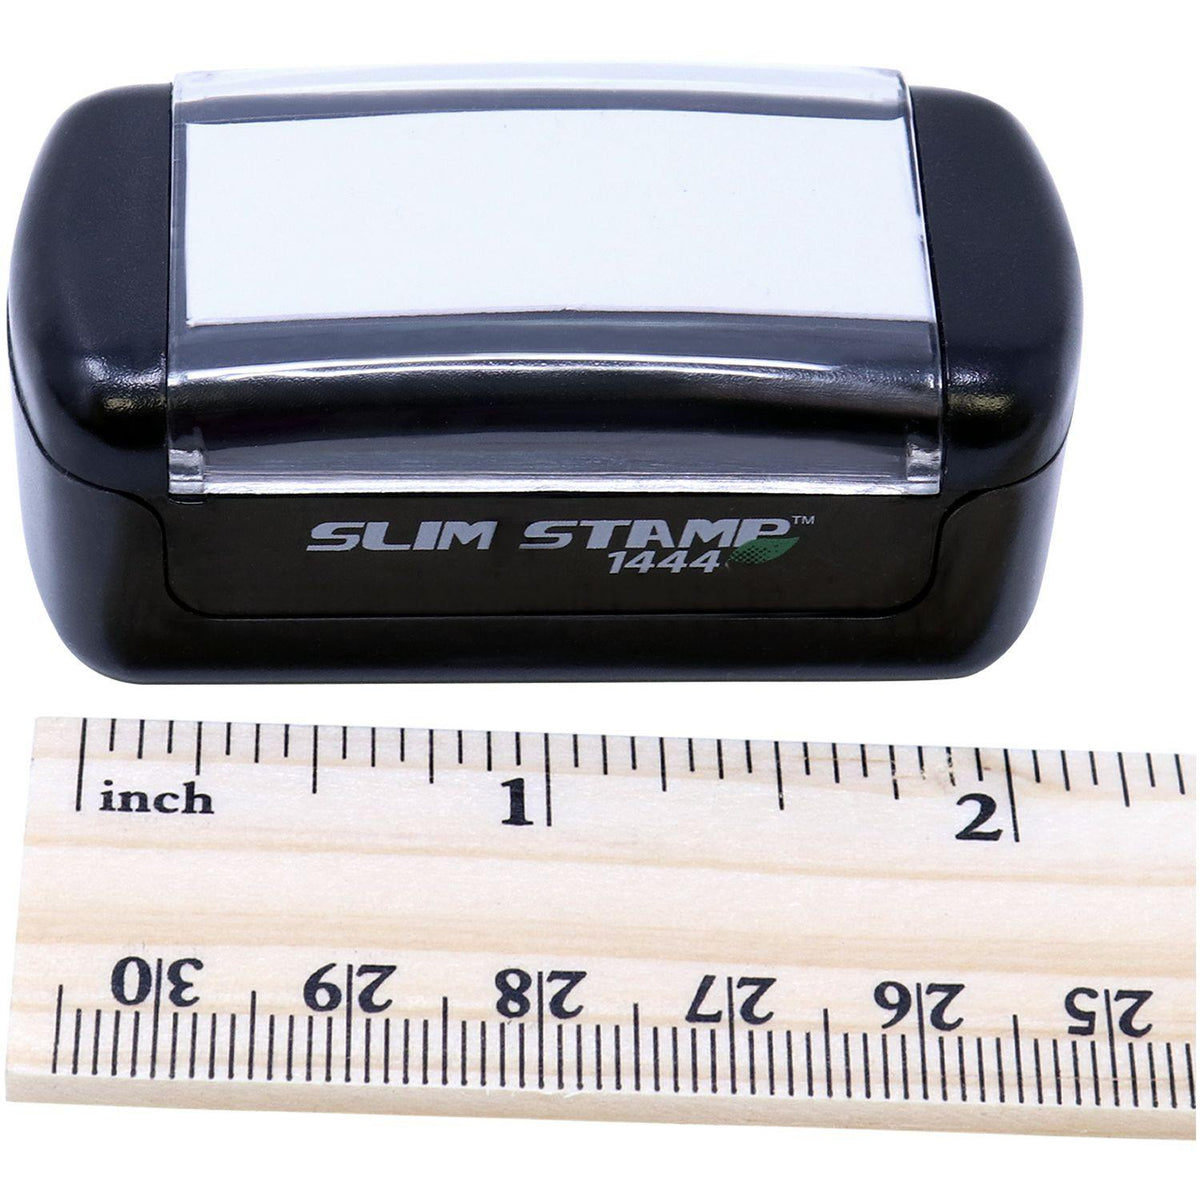 Measurement Slim Pre-Inked Copy with Letter Stamp with Ruler